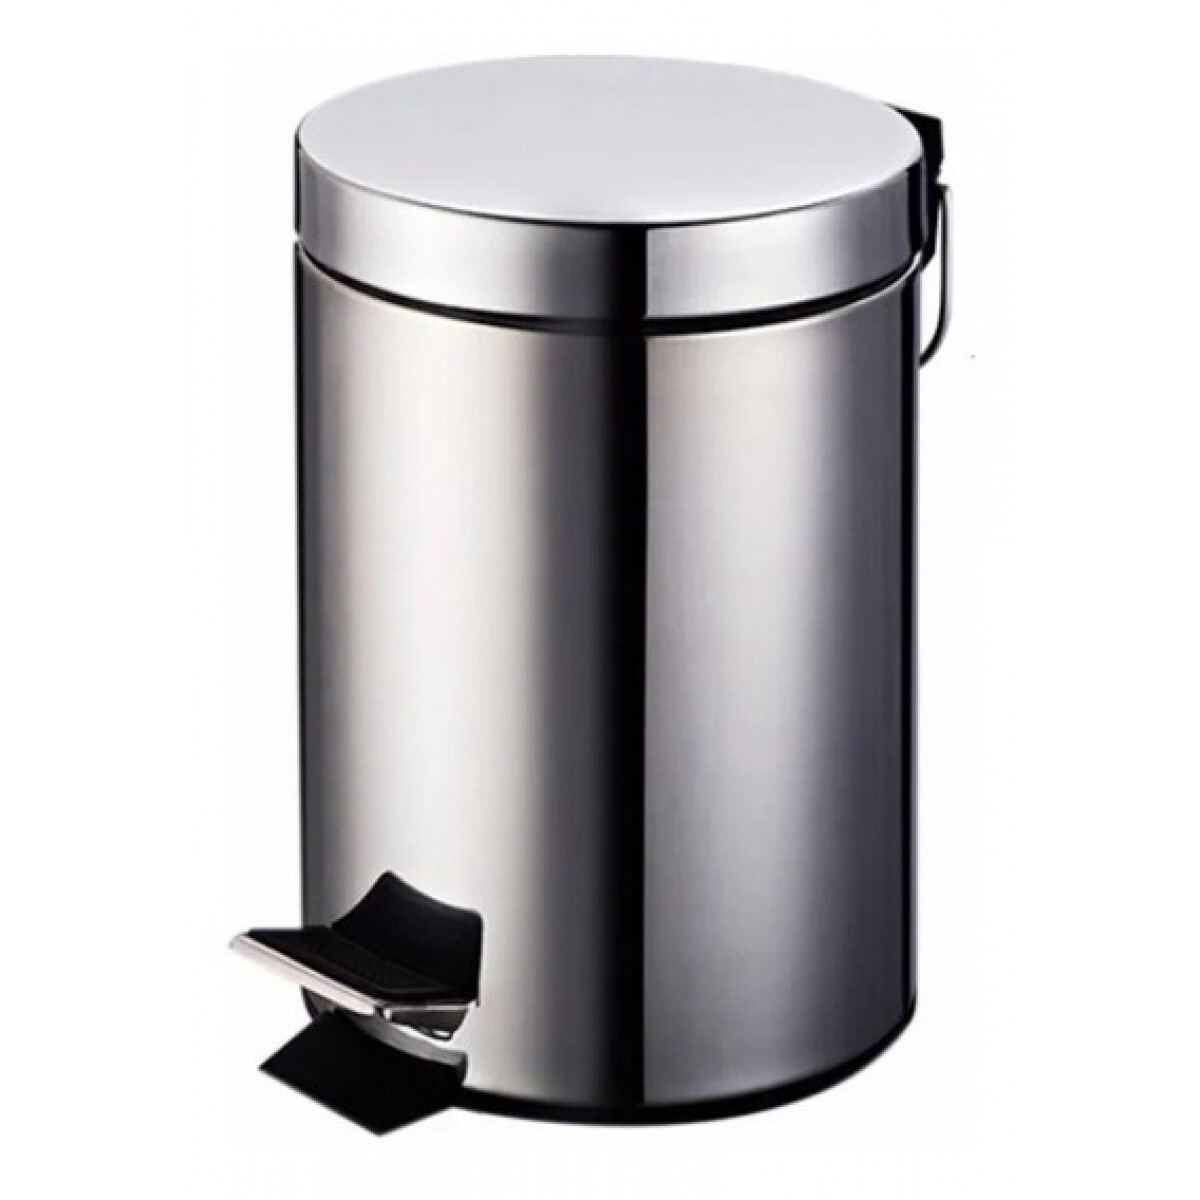 Stainless Steel Garbage Rubbish Bin with Pedal 8L